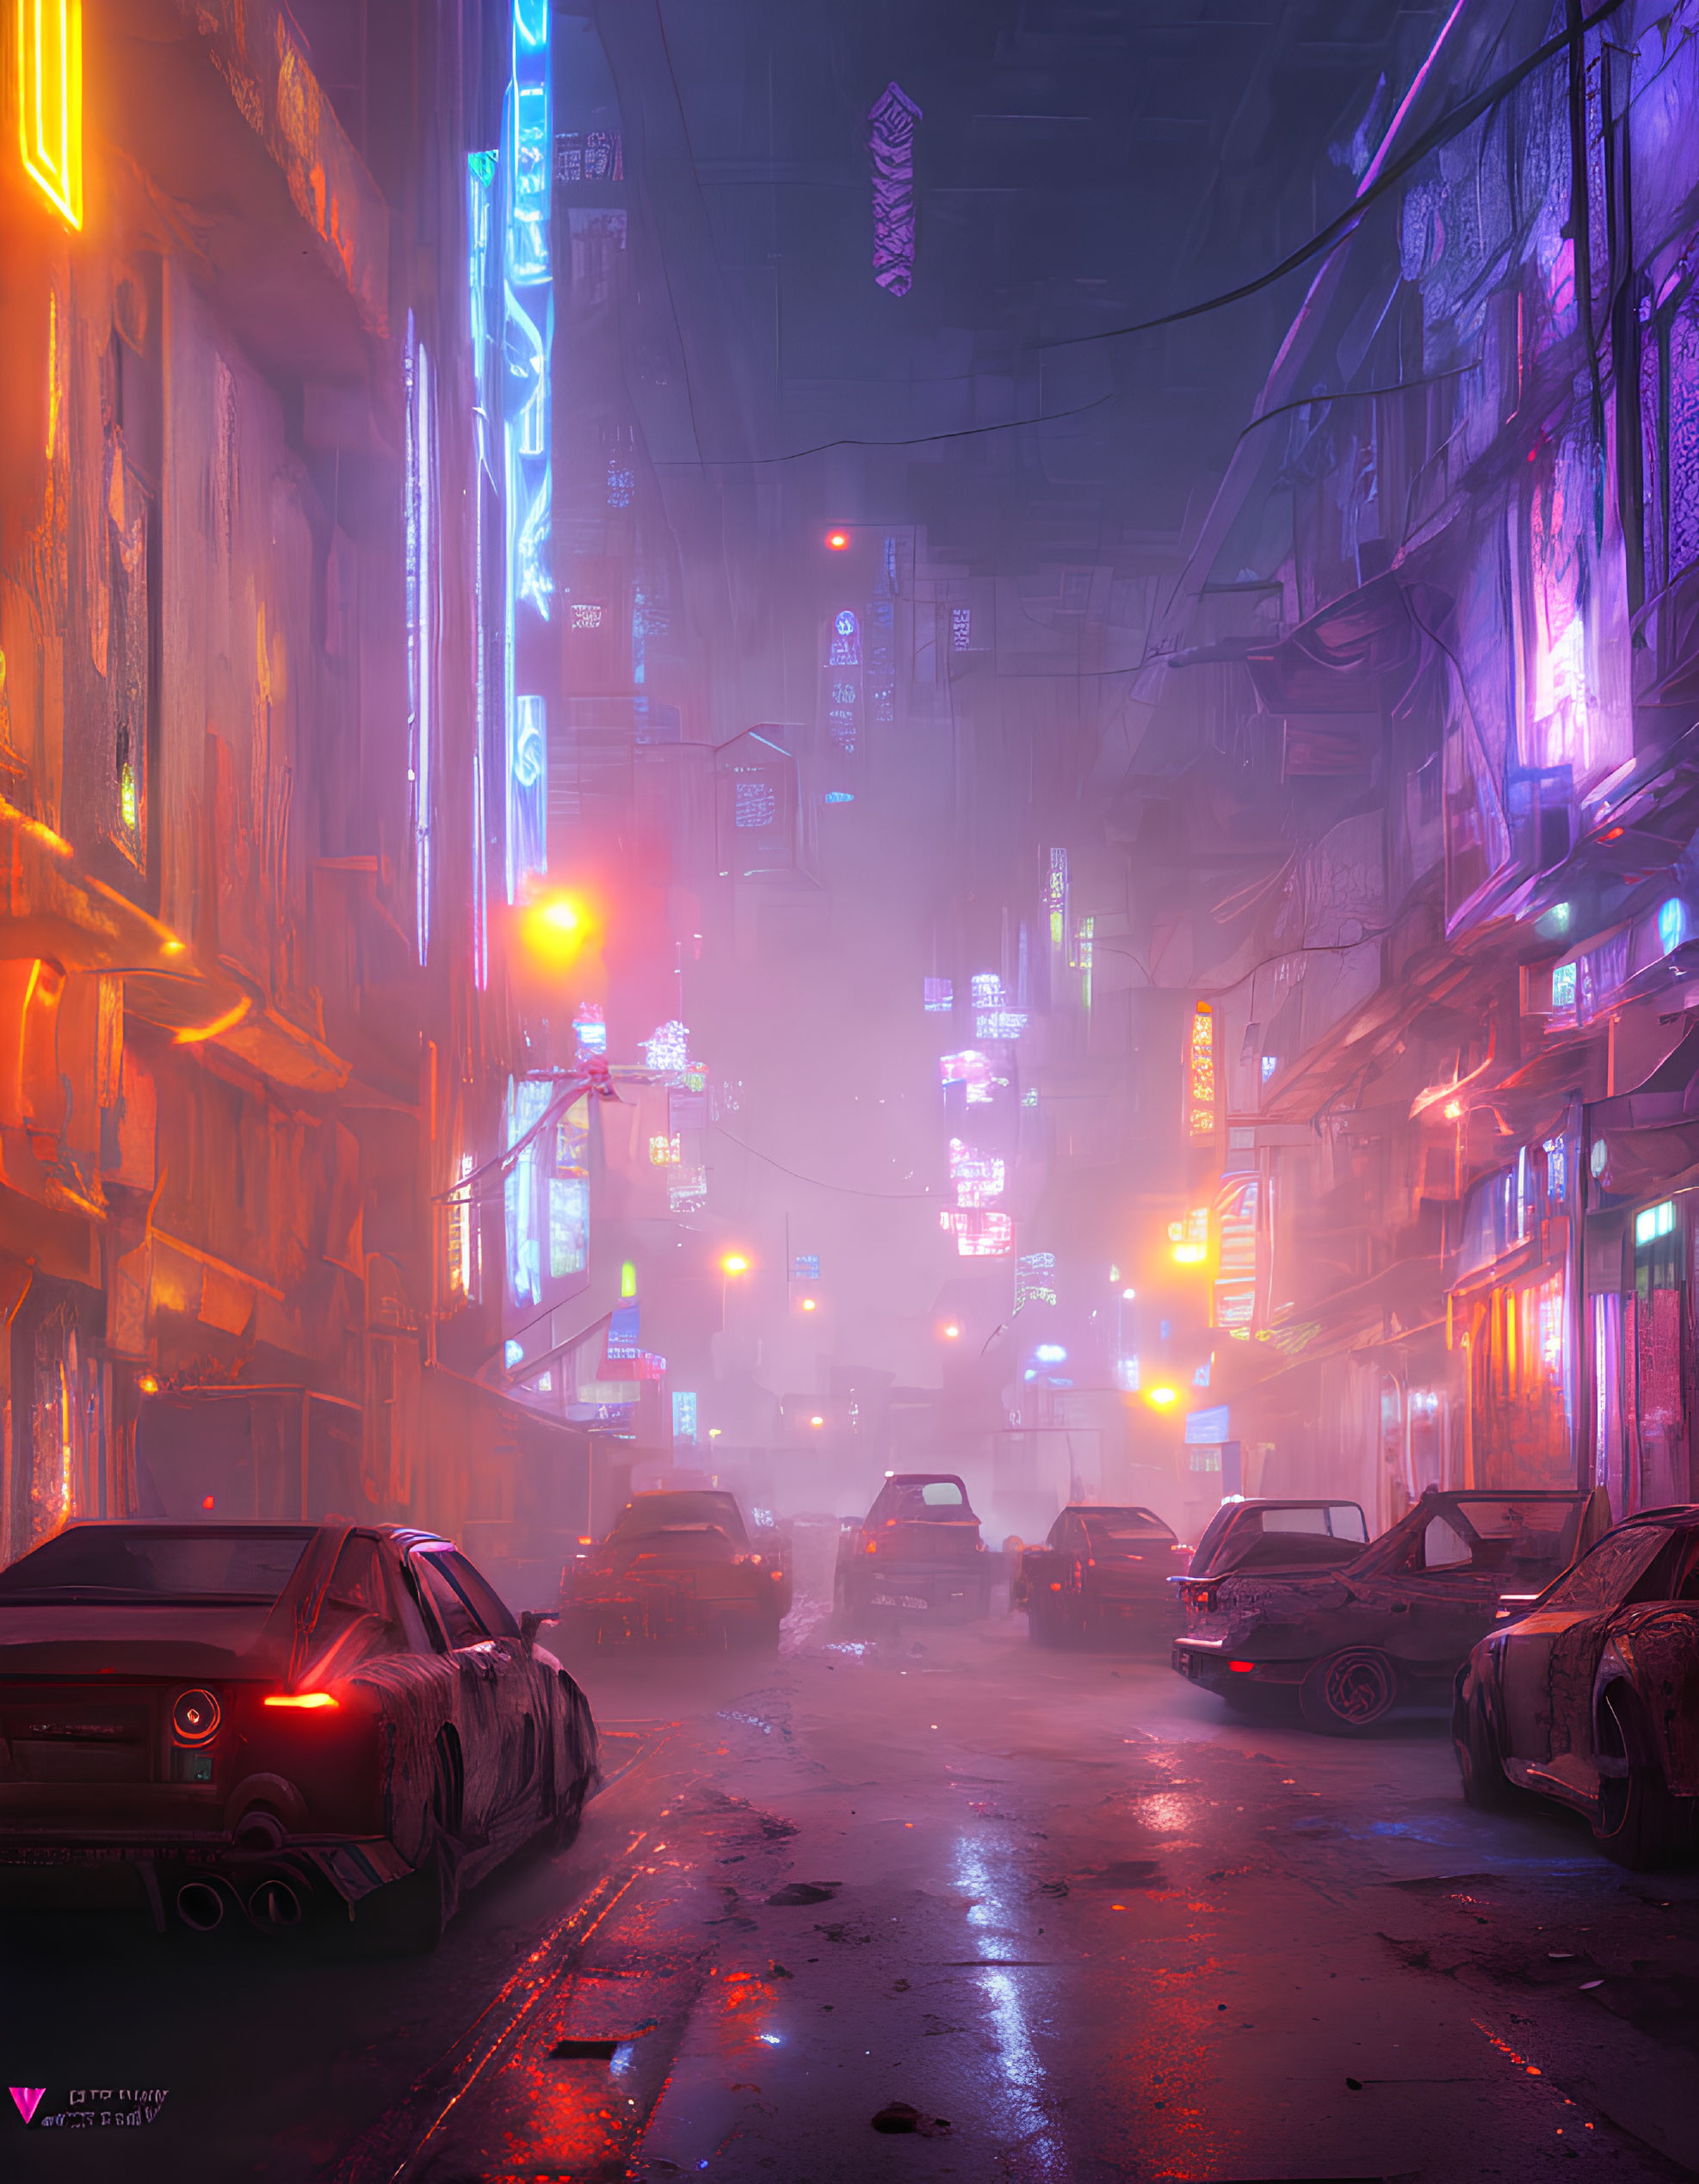 Futuristic neon-lit city street at night with skyscrapers and mist